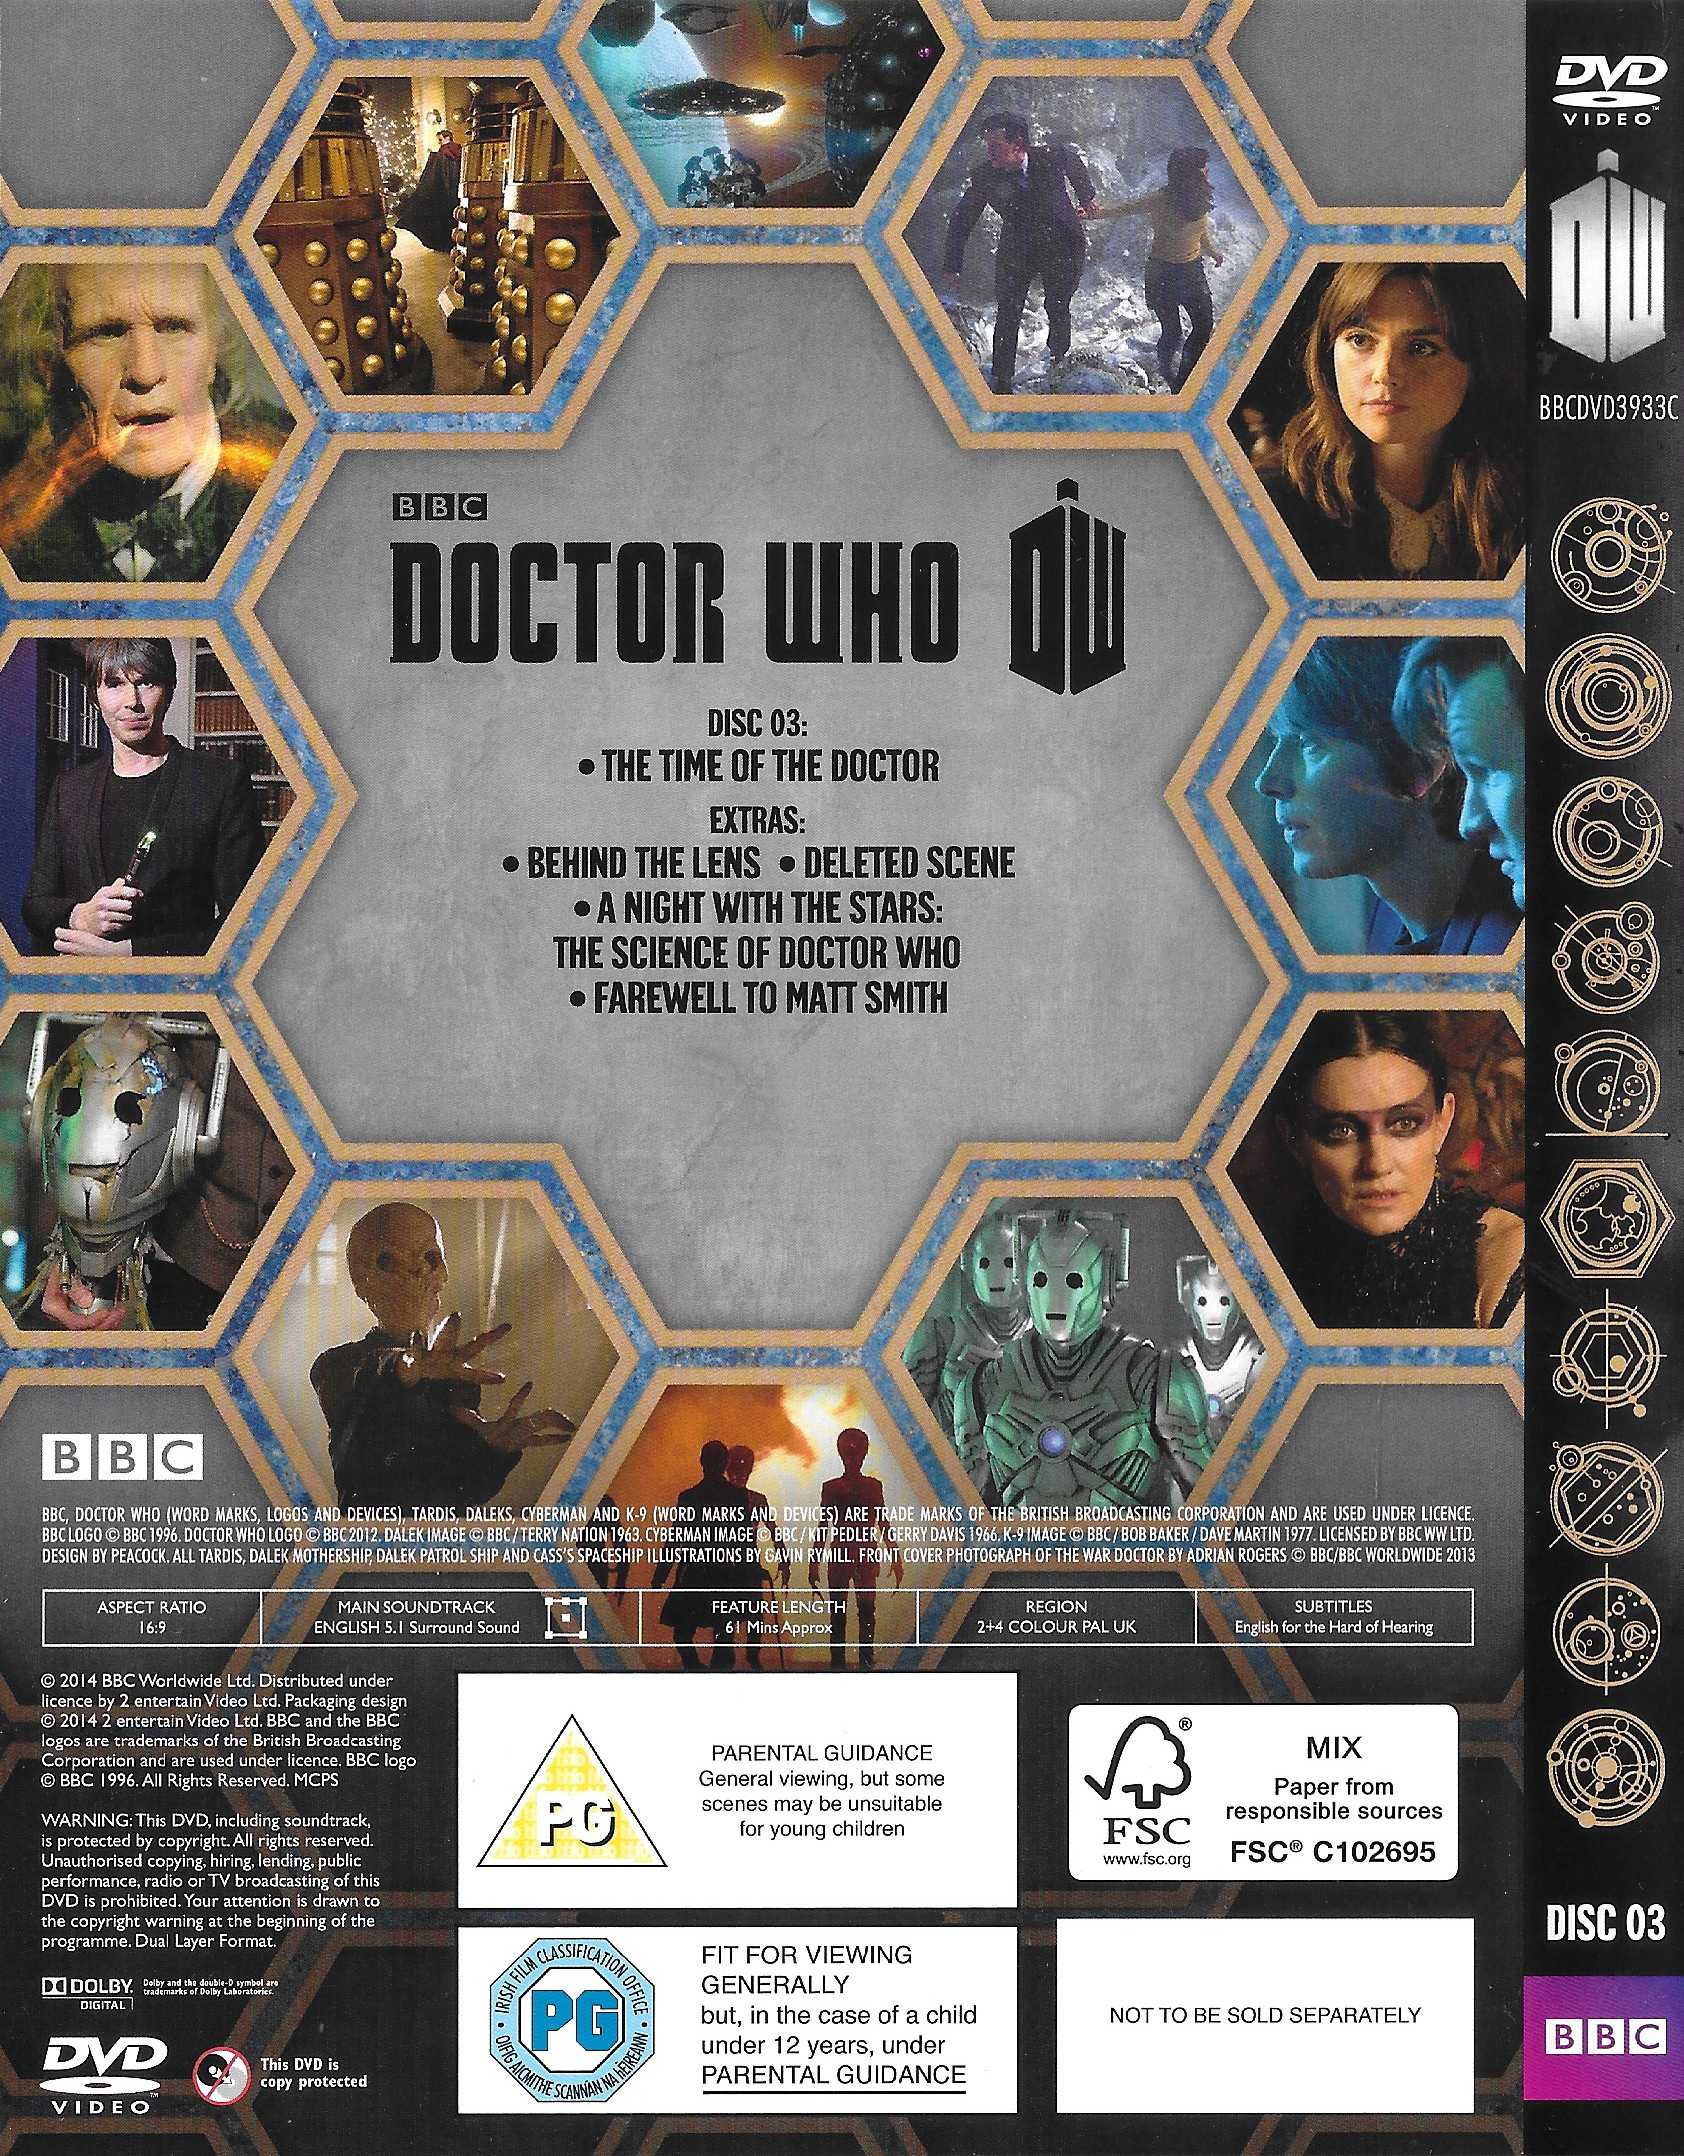 Picture of BBCDVD 3933 03 Doctor Who - The time of the Doctor by artist Steven Moffat from the BBC records and Tapes library